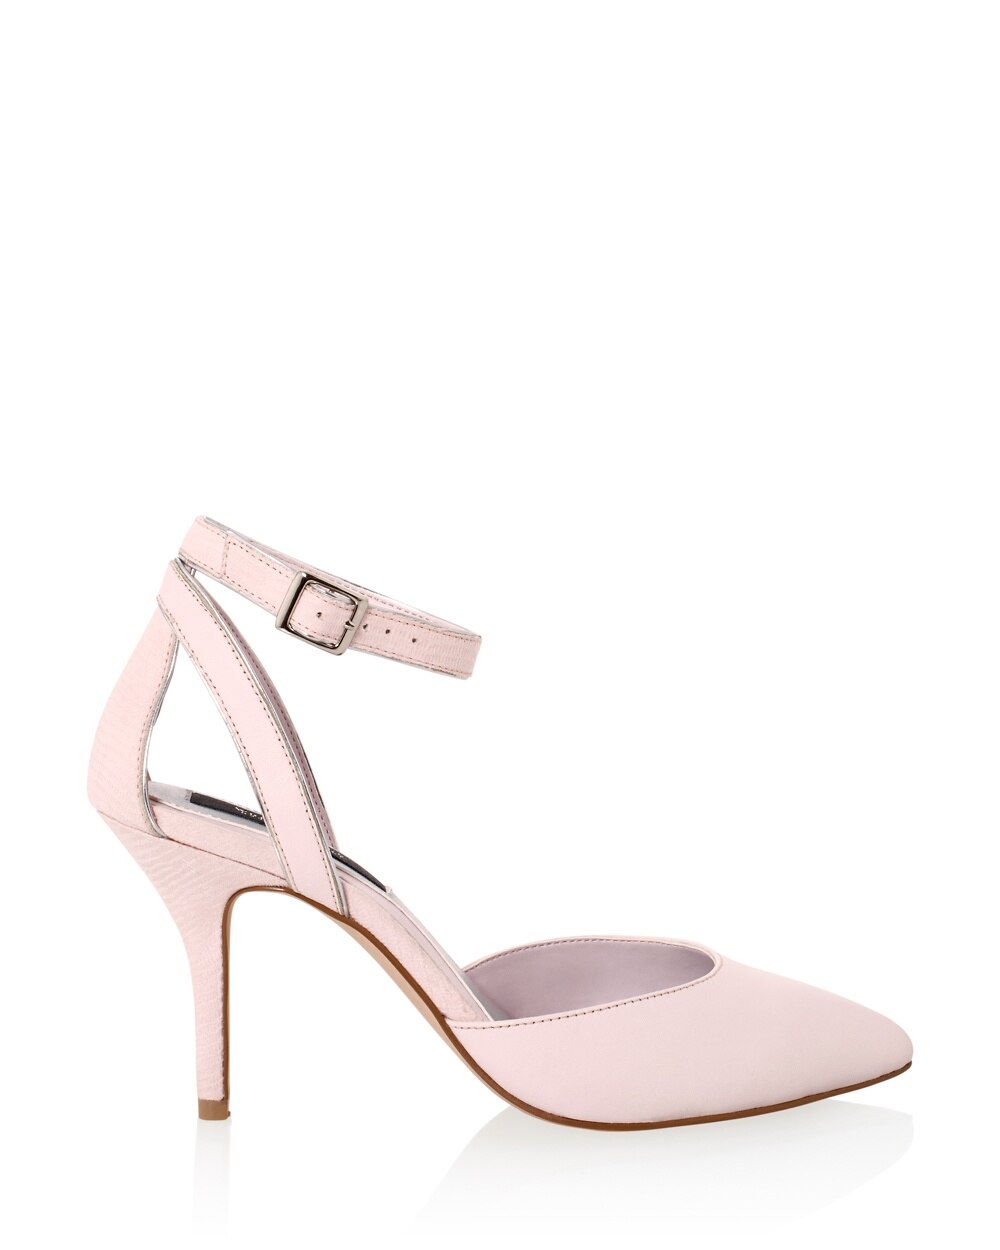 Pink Ankle Strap Heels - Shop Women's New Arrivals - White House Black ...